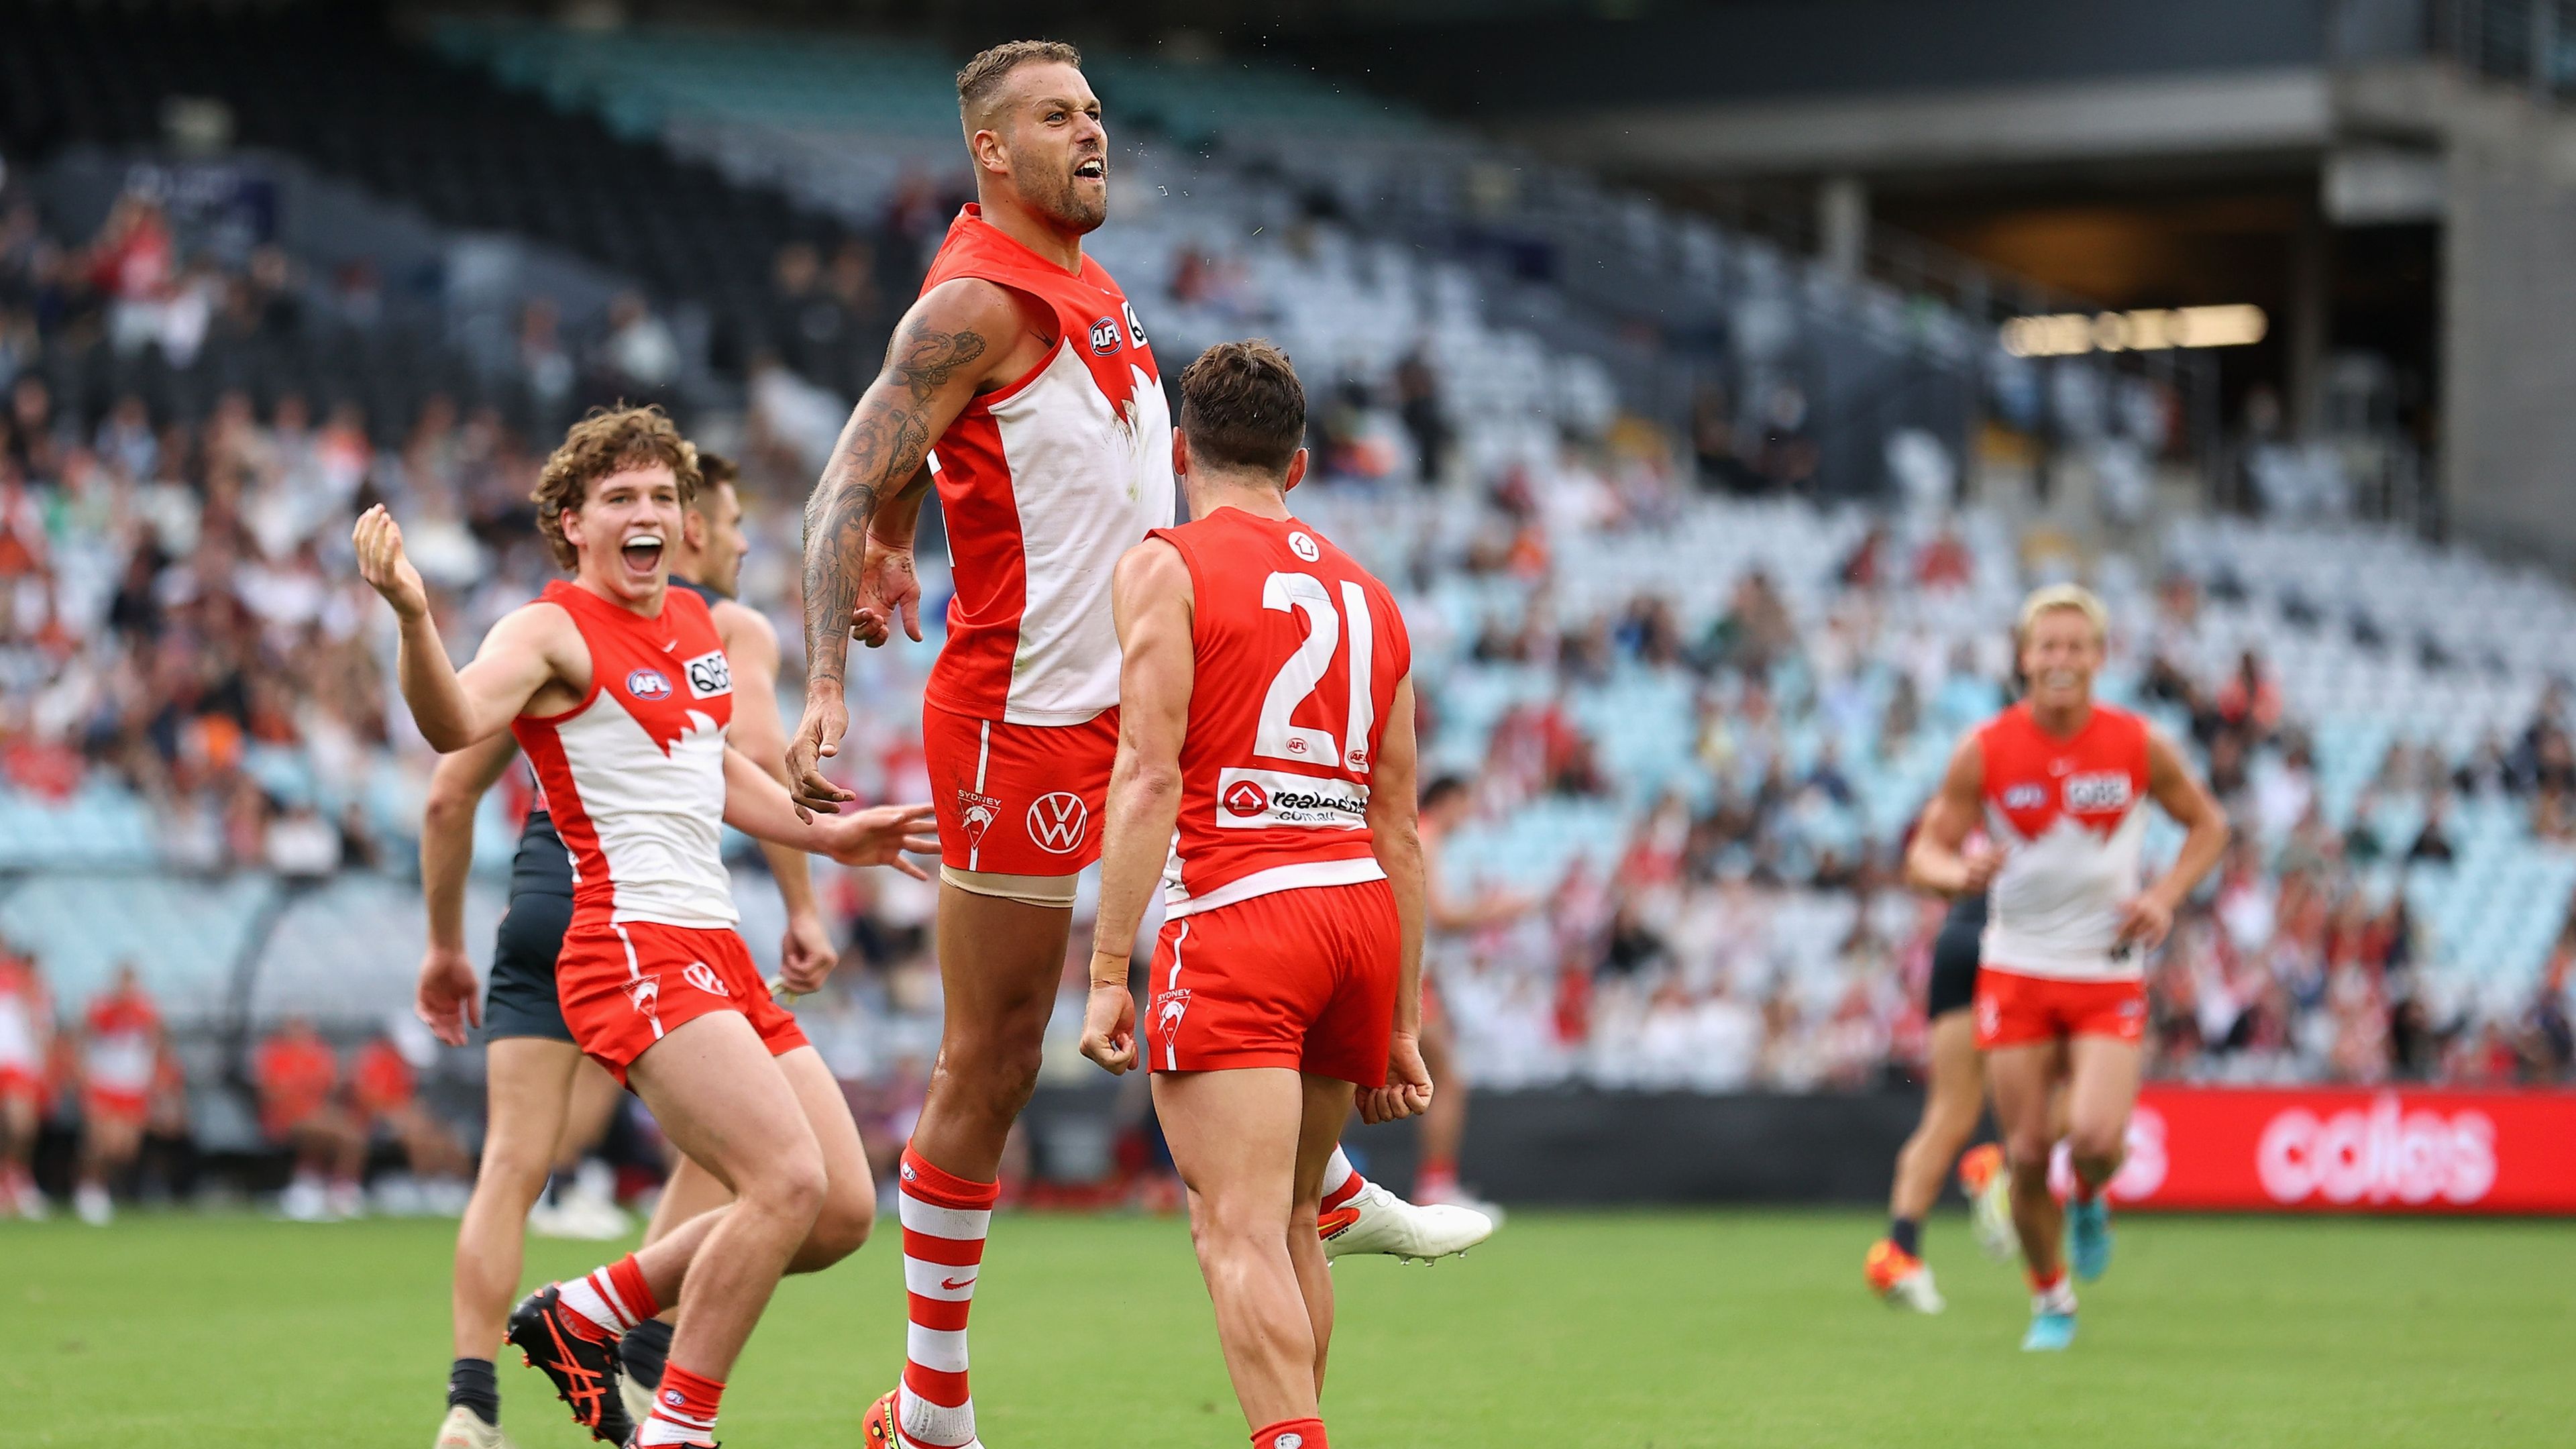 Lance Franklin's pursuit of 1000-goal club stalled by Giants arch-enemy